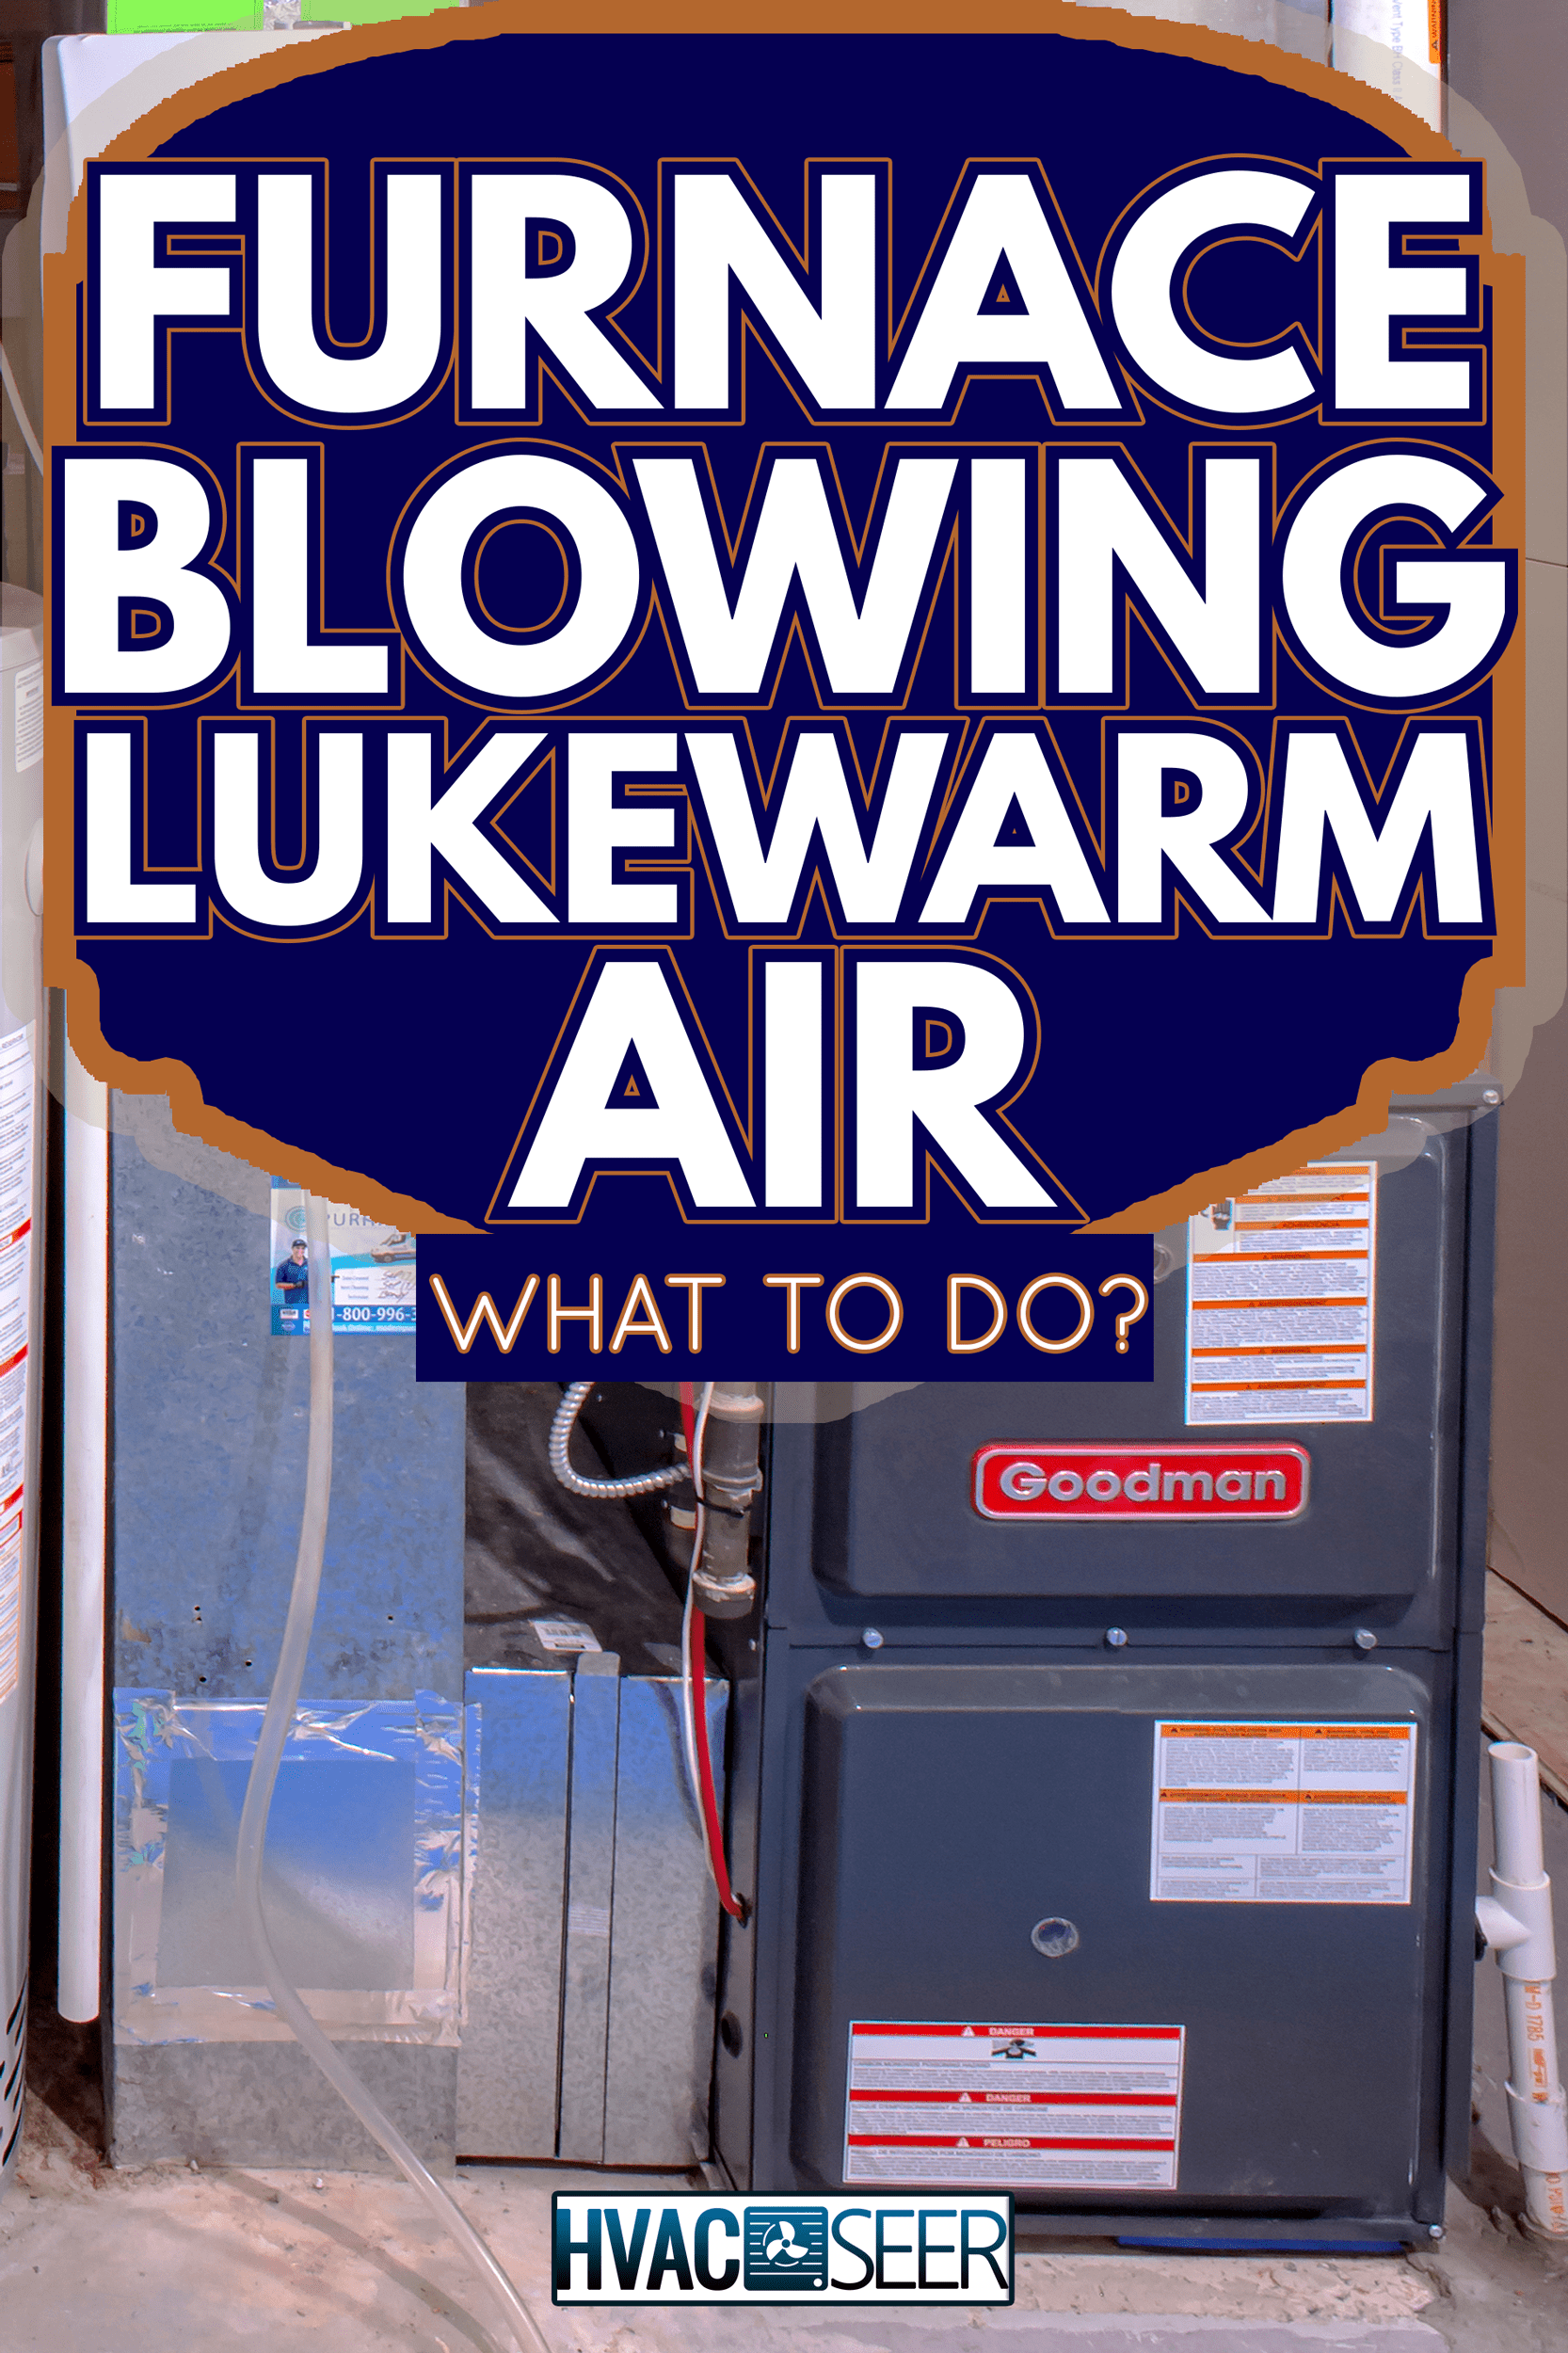 Furnace Blowing Lukewarm Air - What To Do